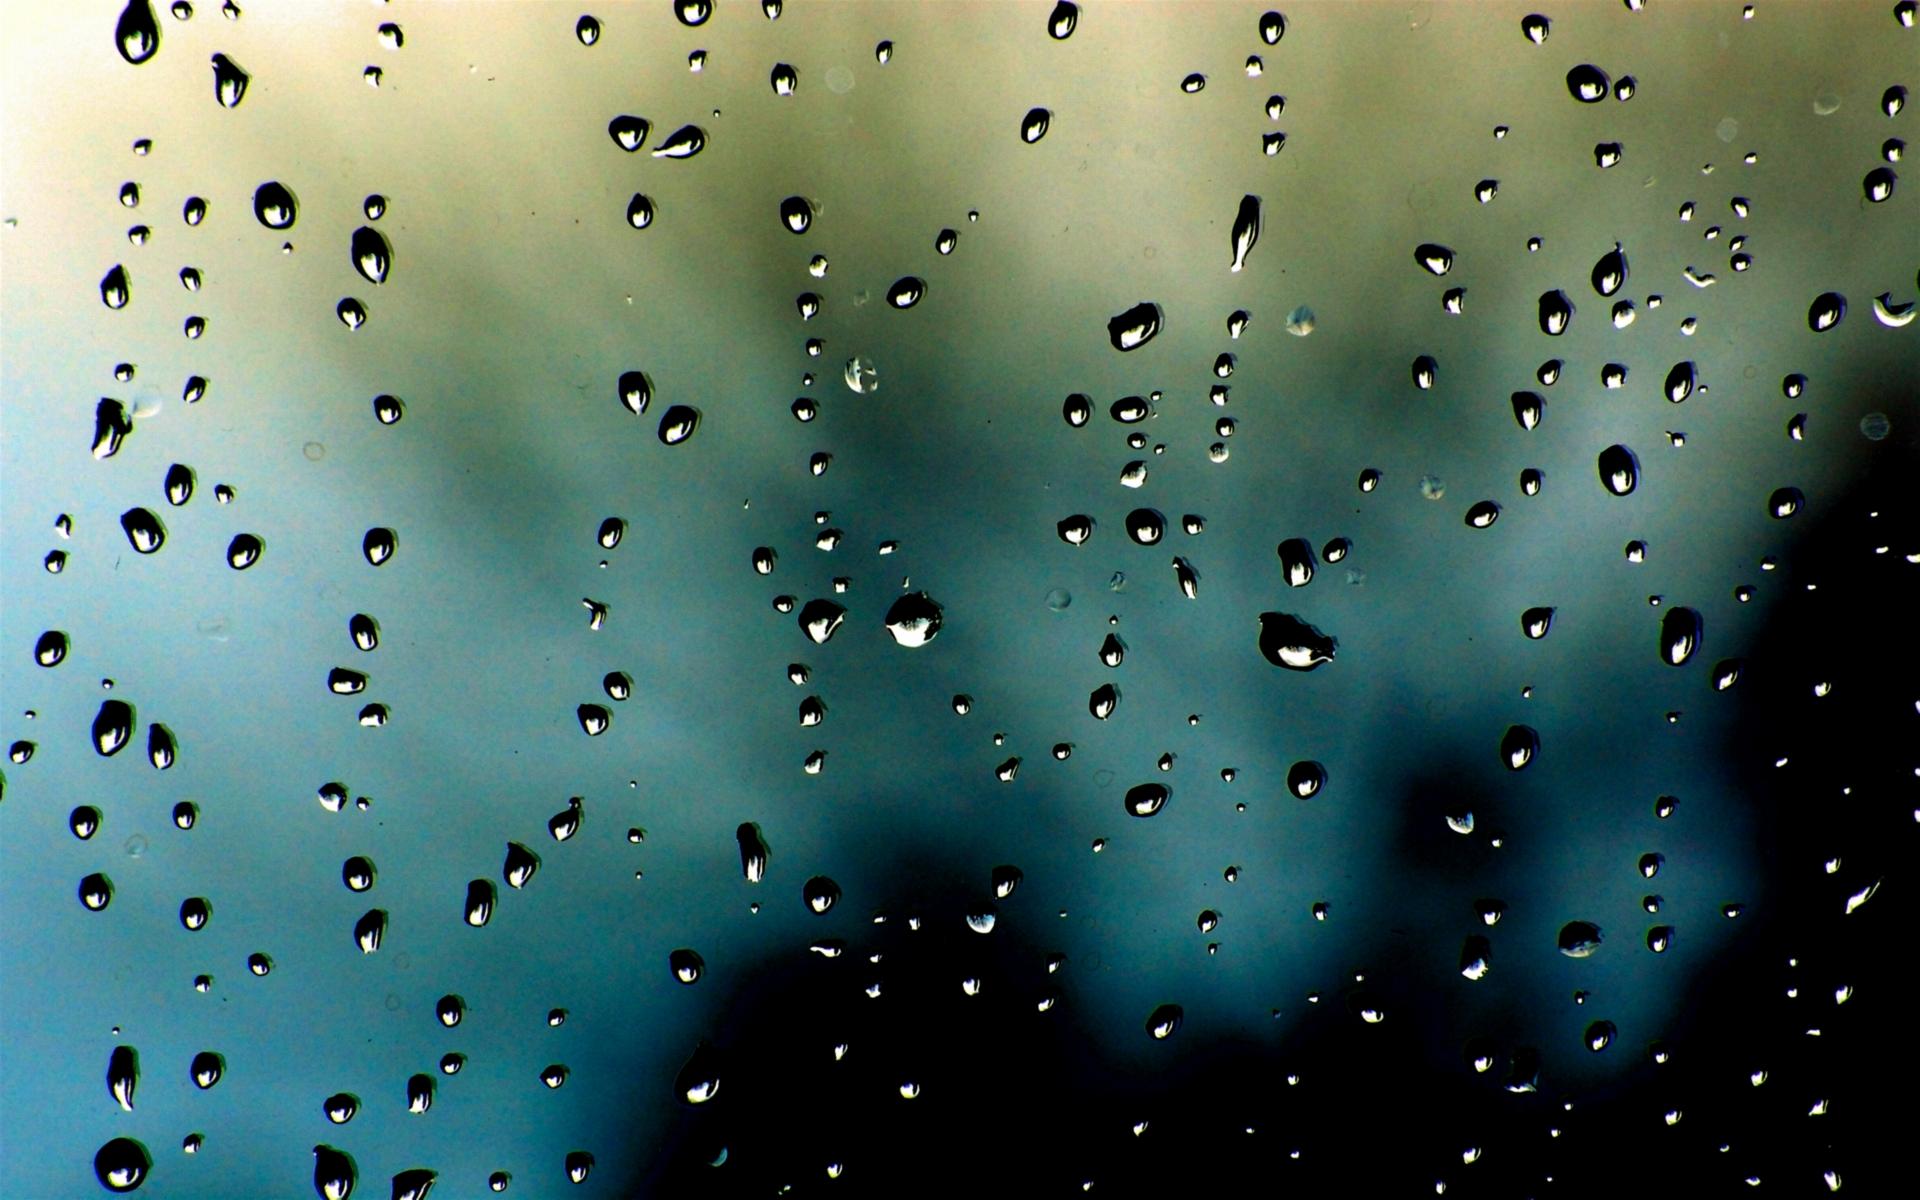 Droplets wallpapers Droplets stock photos